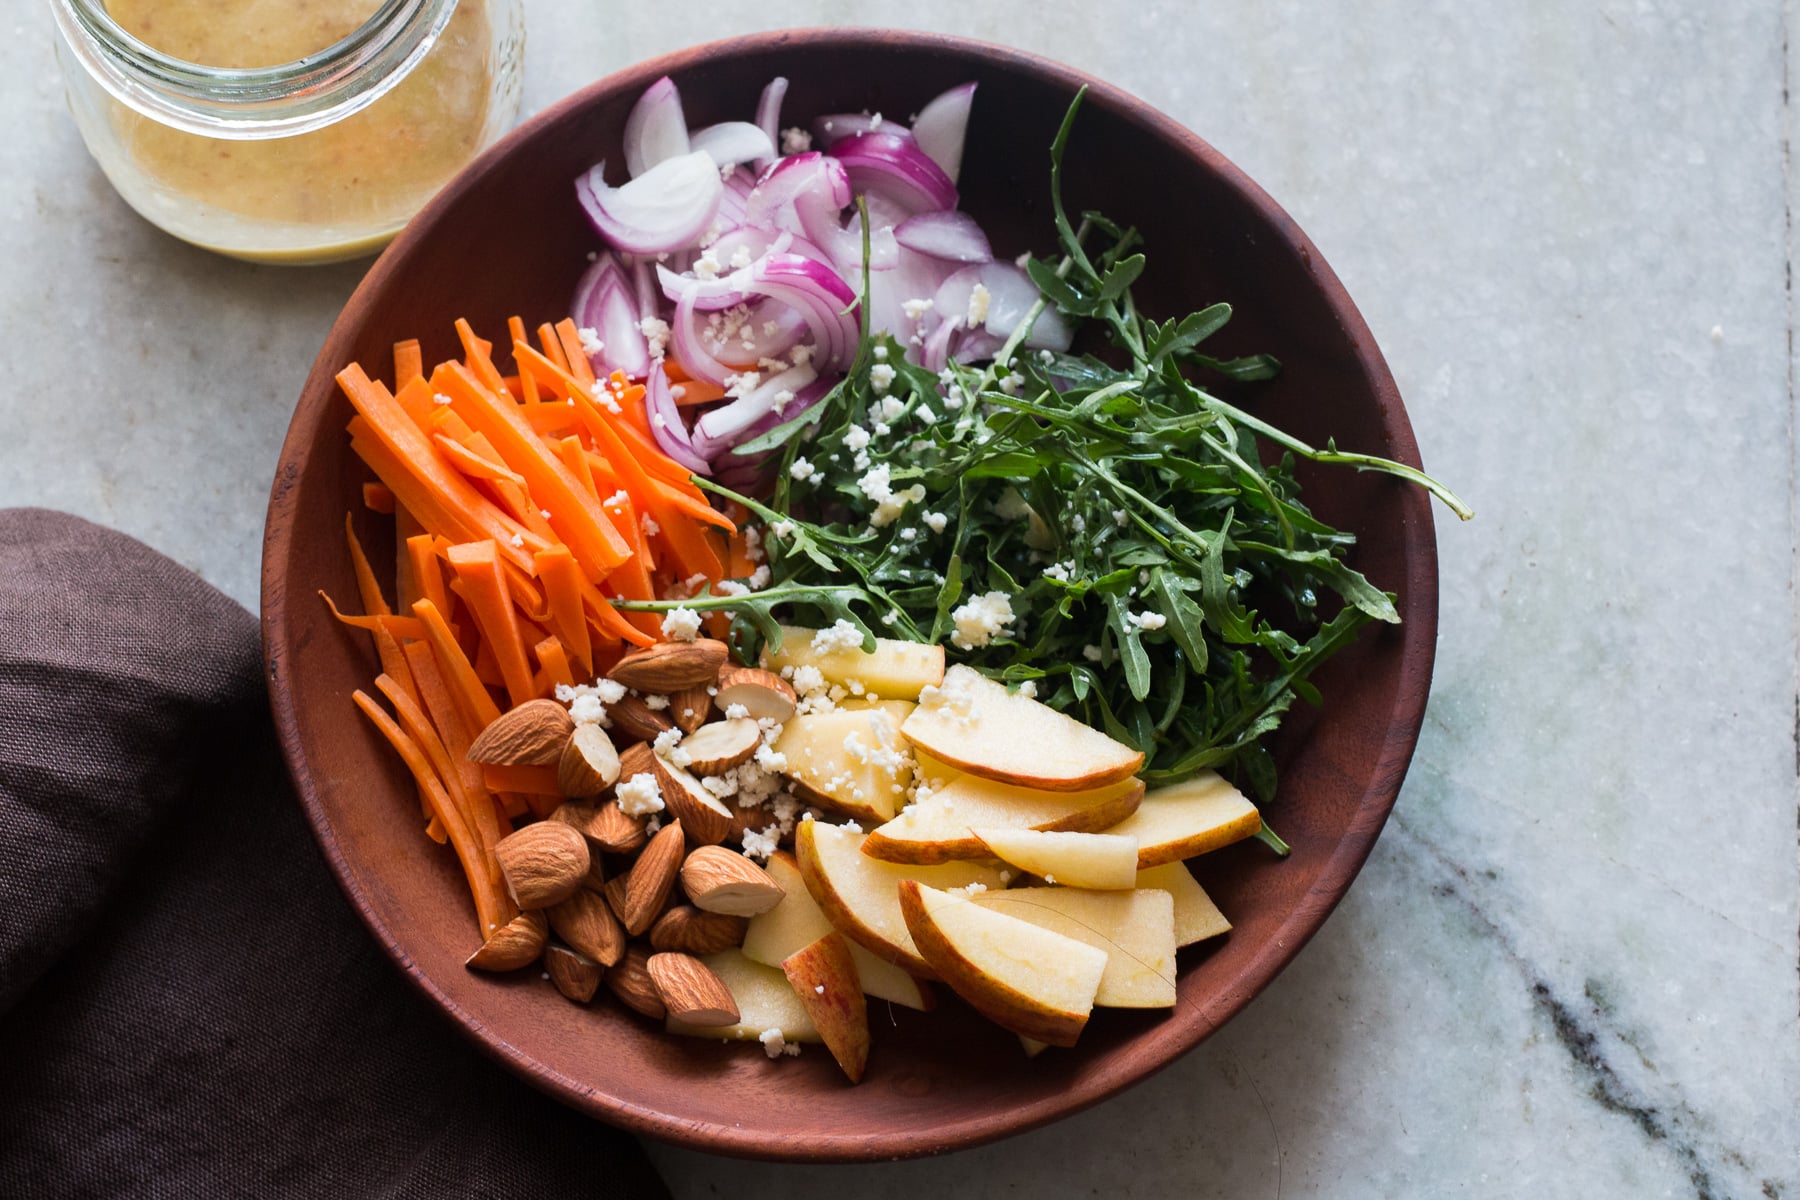 wooden bowl with apple slices, almonds, carrots, arugula, onion, and goat cheese in it